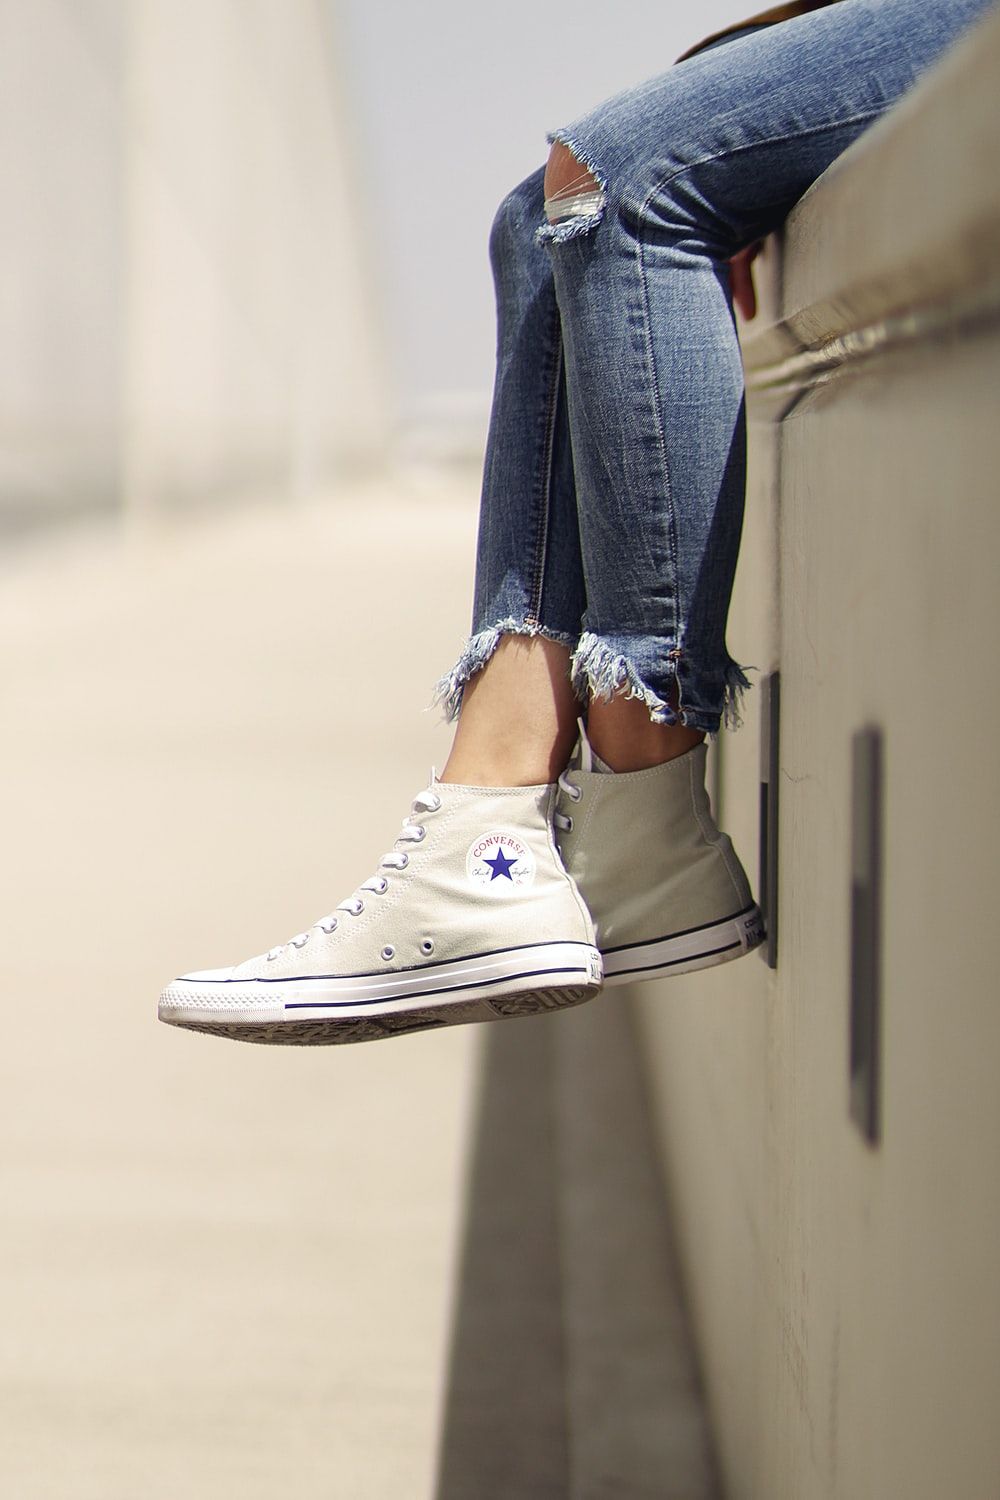 Woman Wearing White Converse Low Top Sneakers Photo